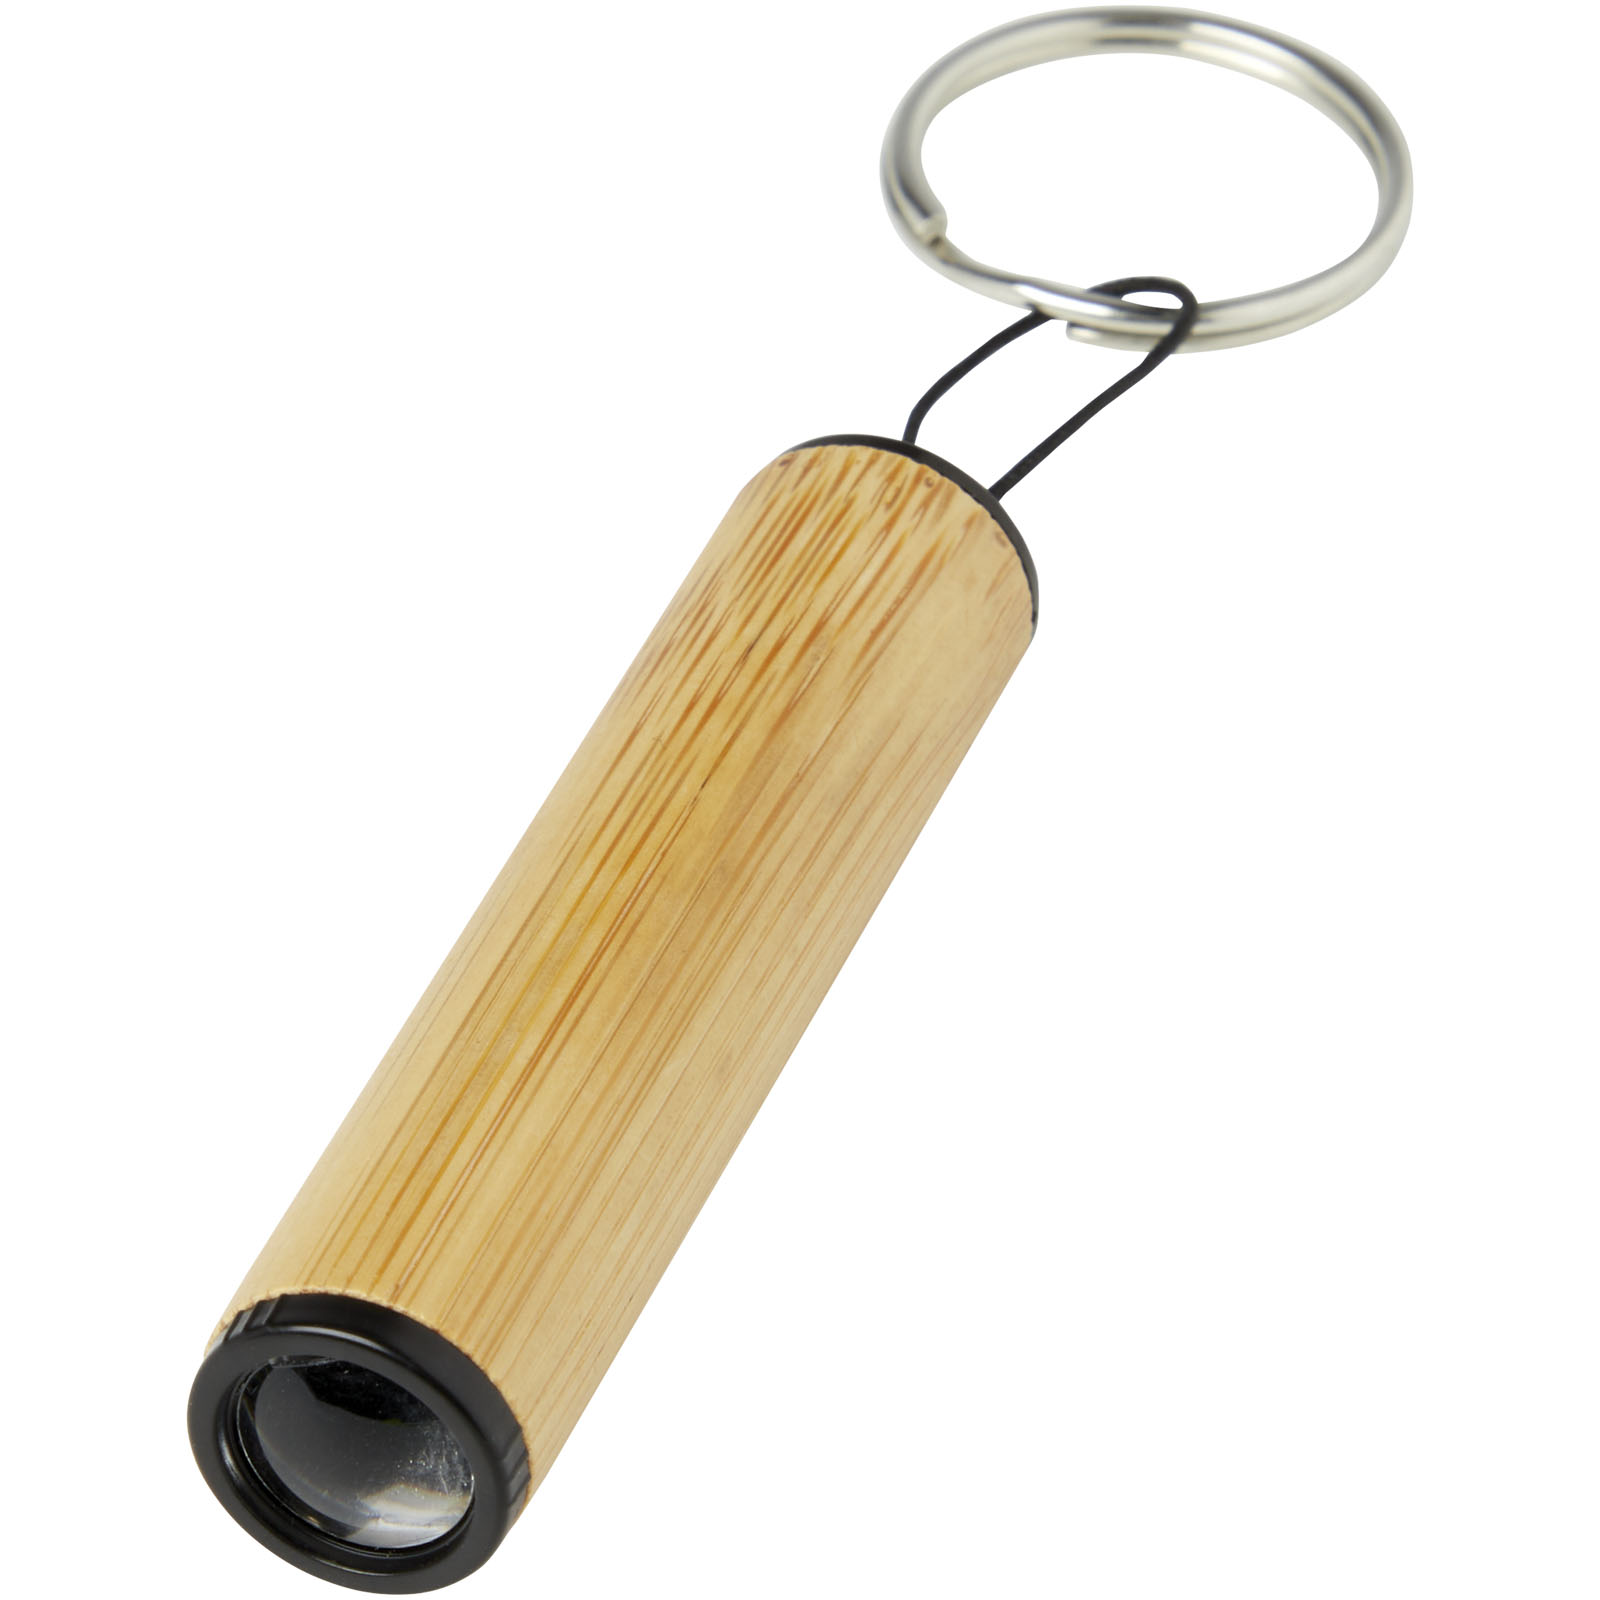 Lamps - Cane bamboo key ring with light